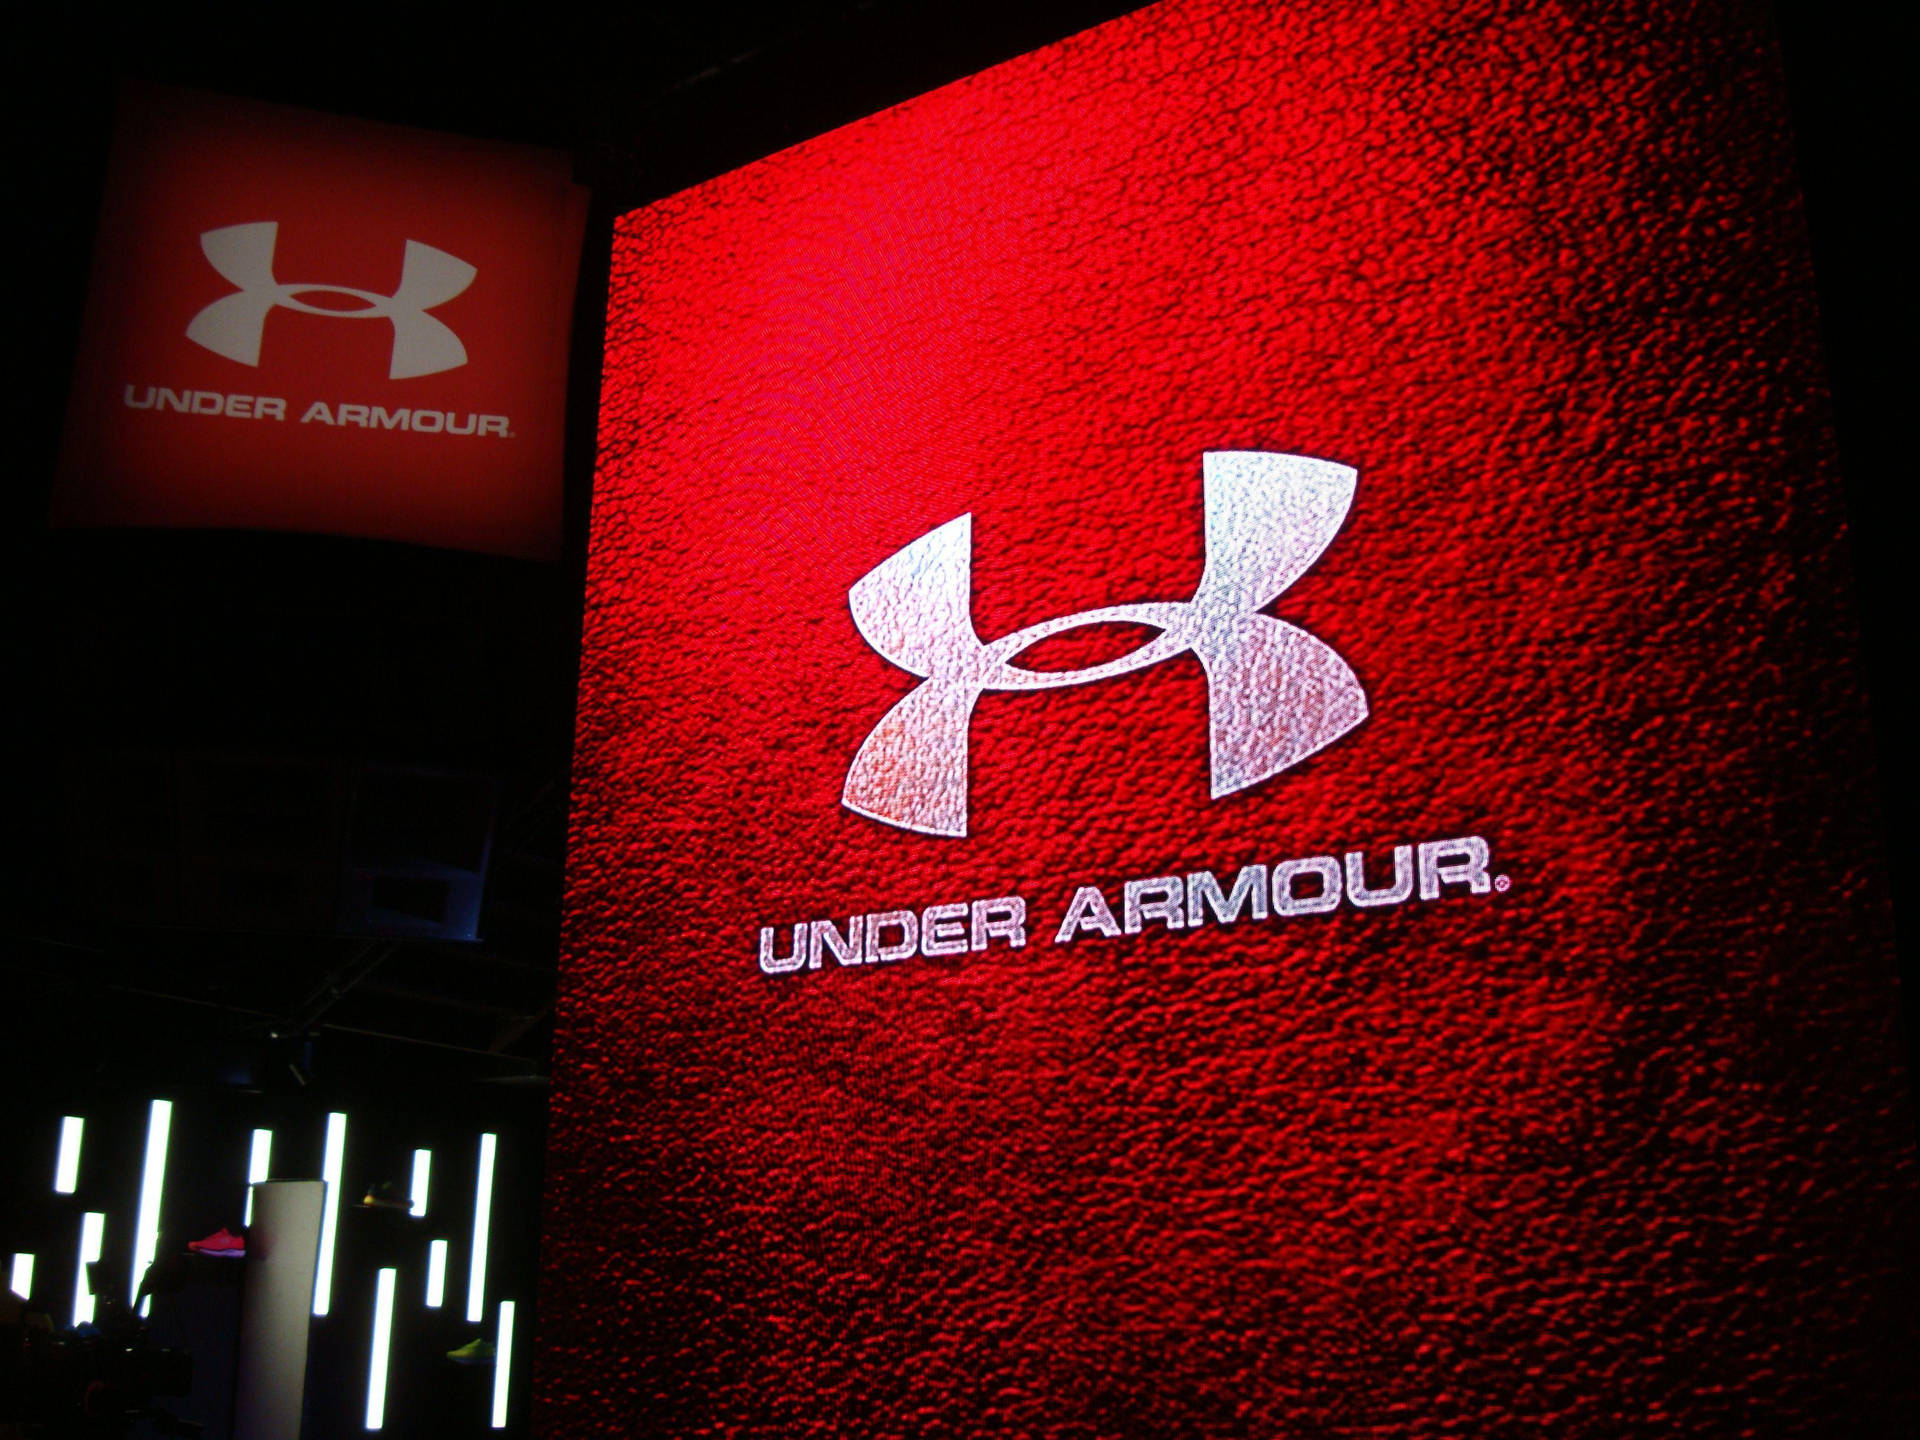 Under Armour 3264X2448 Wallpaper and Background Image